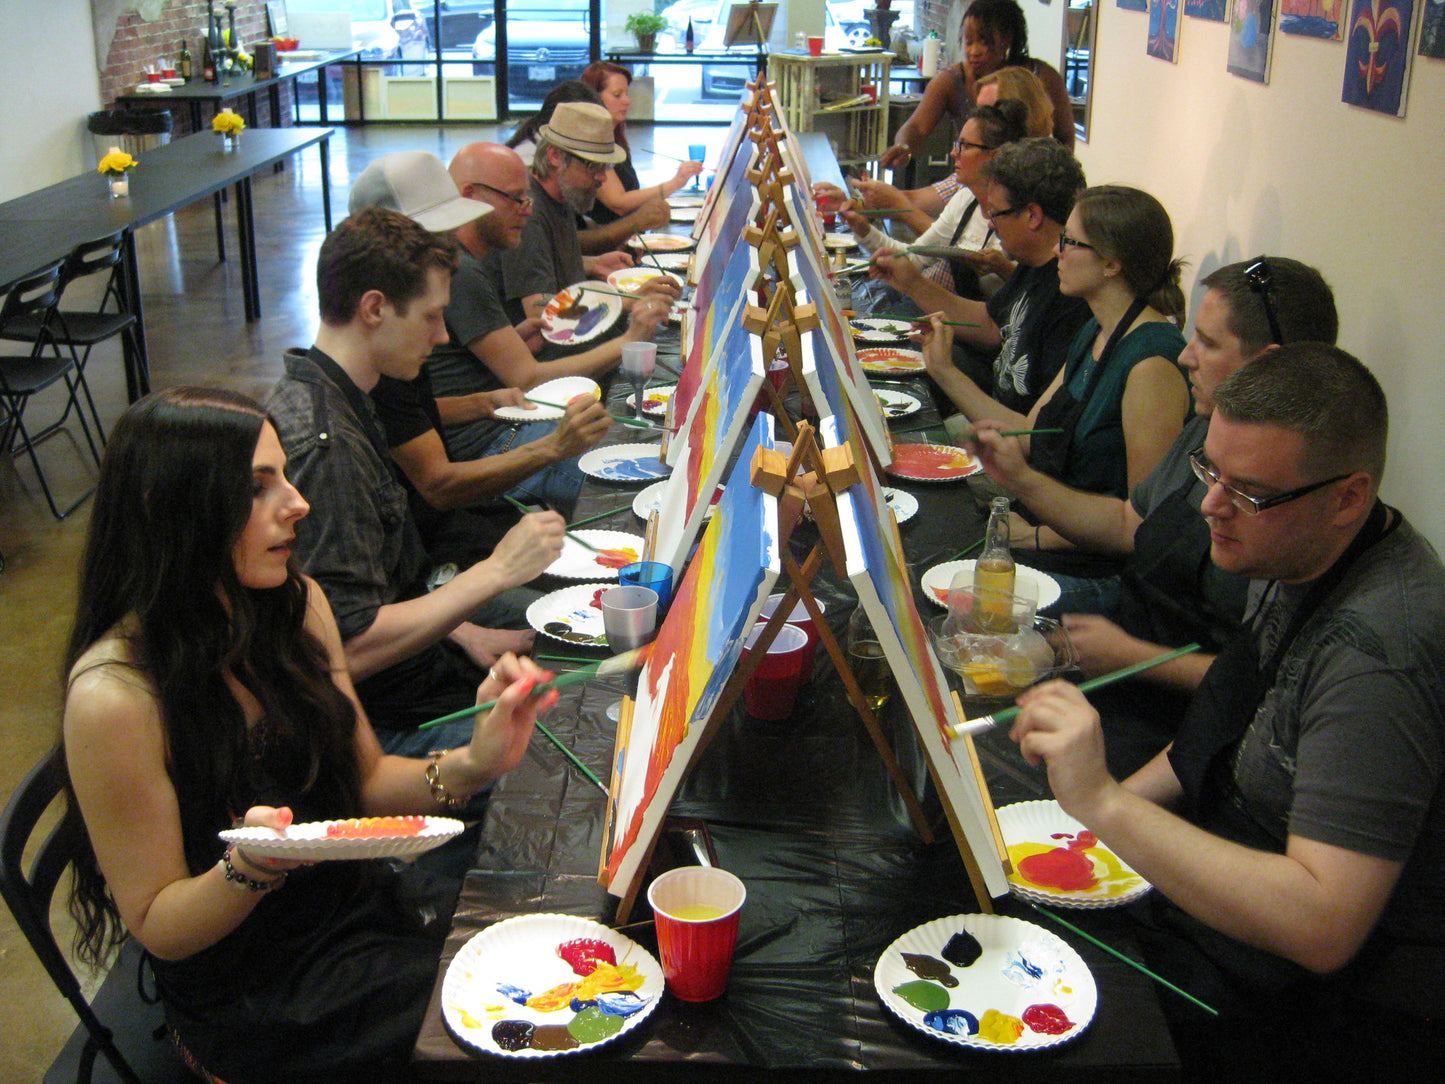 Tues, Oct 20, 430-630pm “Children's Painting Workshop” Houston Painting Class